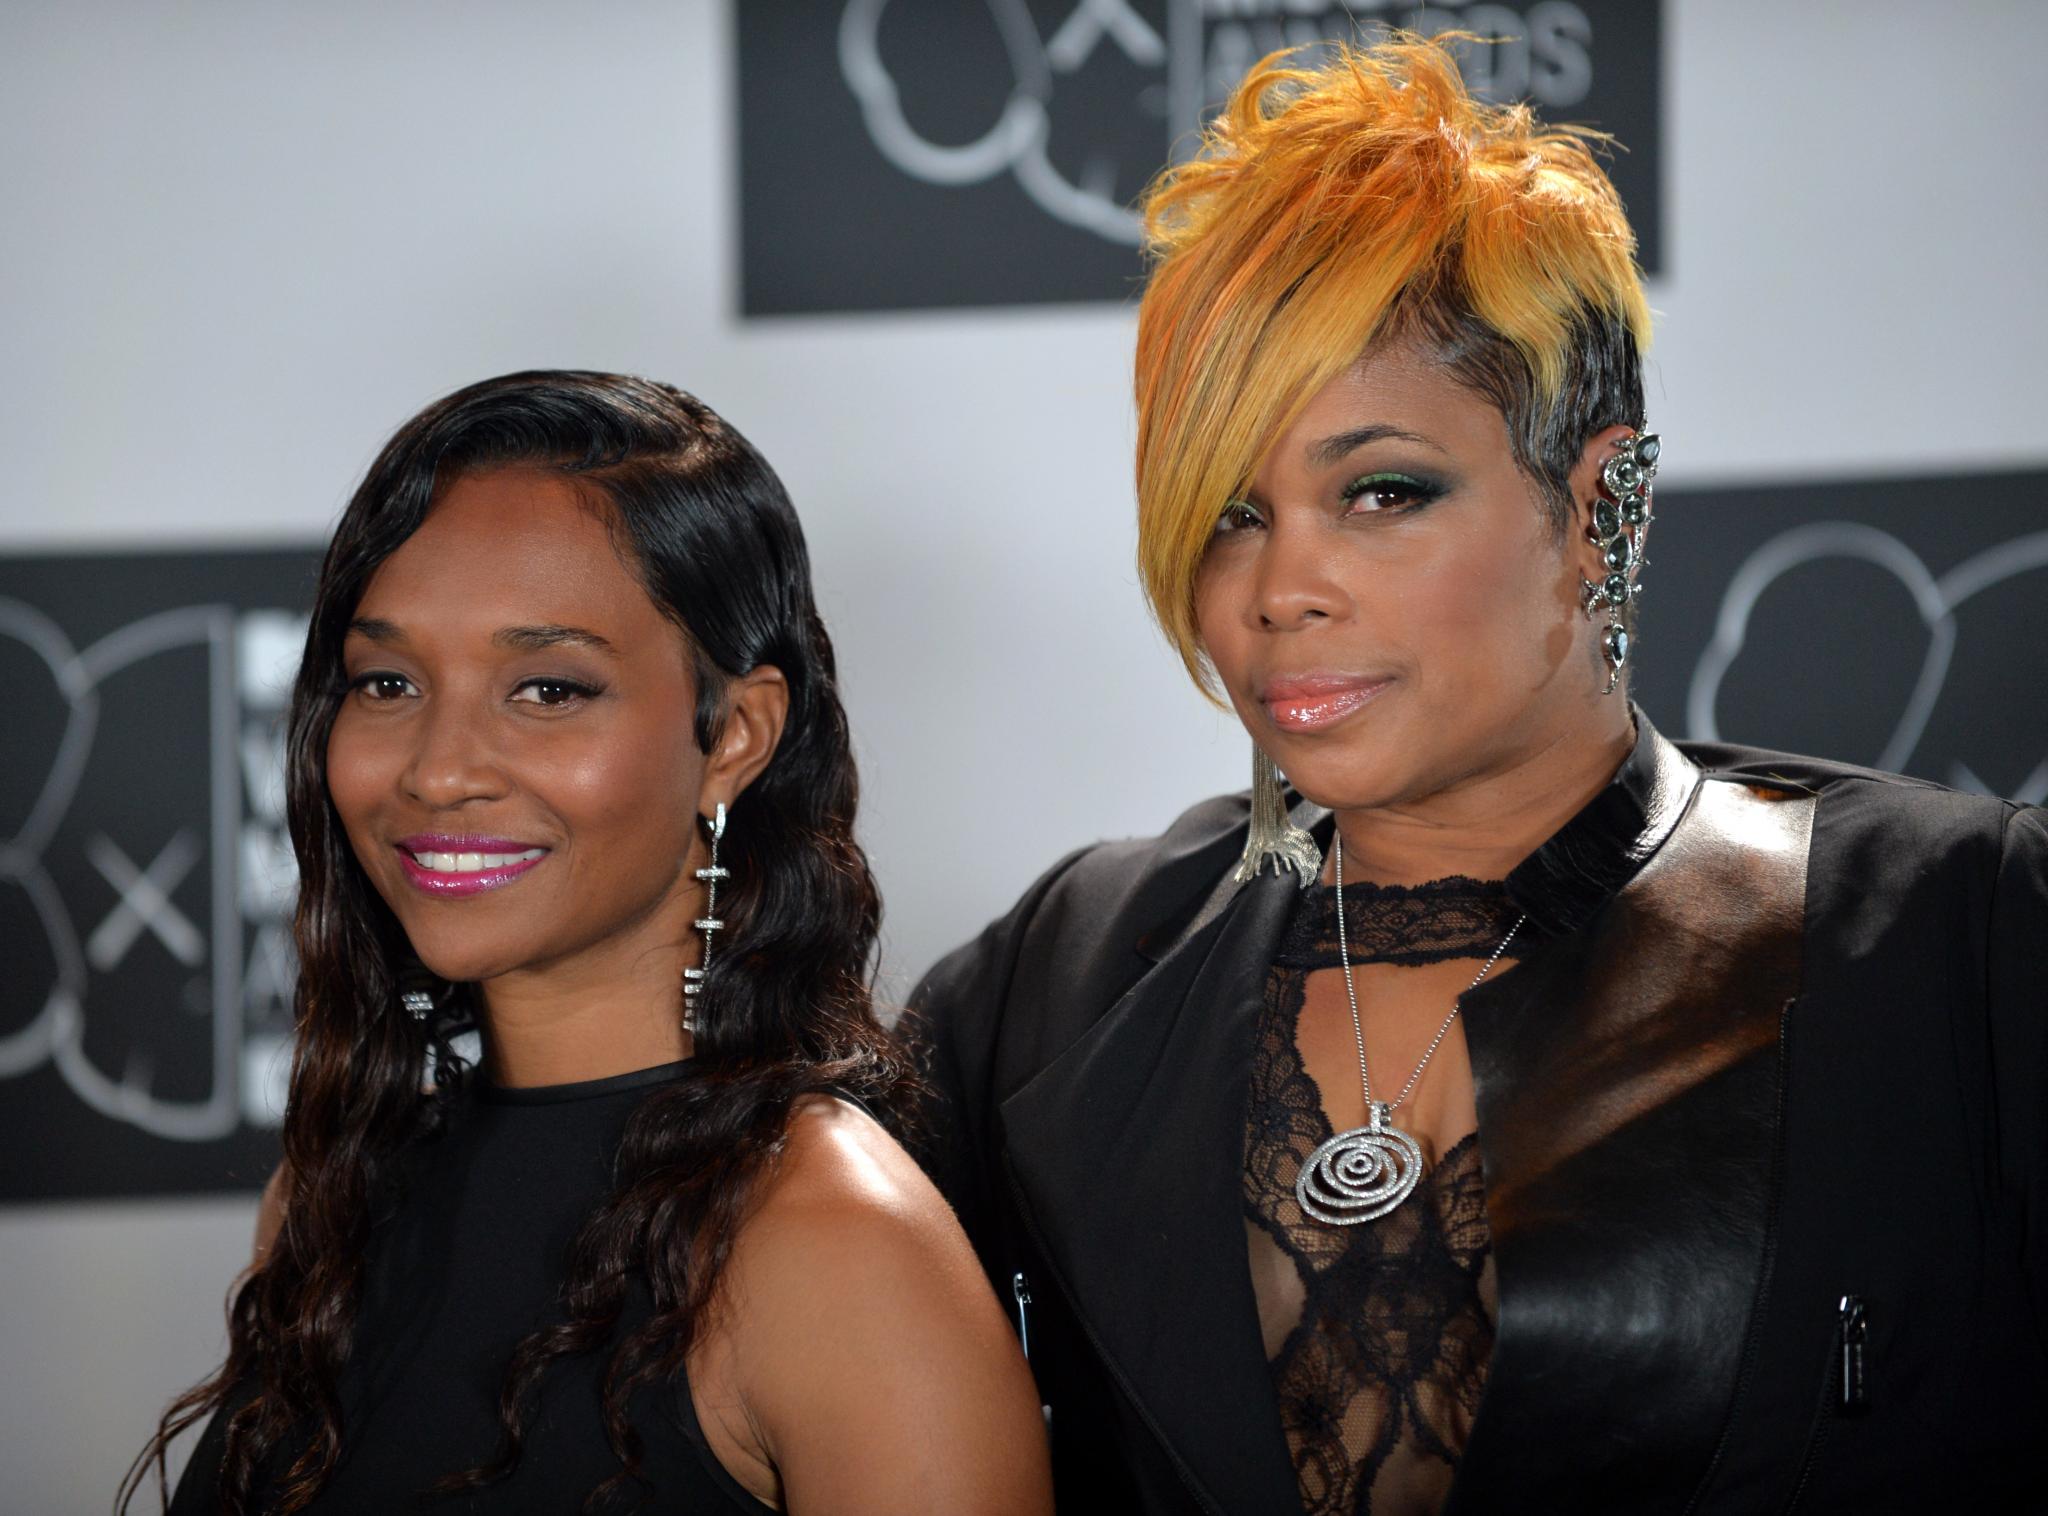 Hear TLC's First New Song in 10 Years